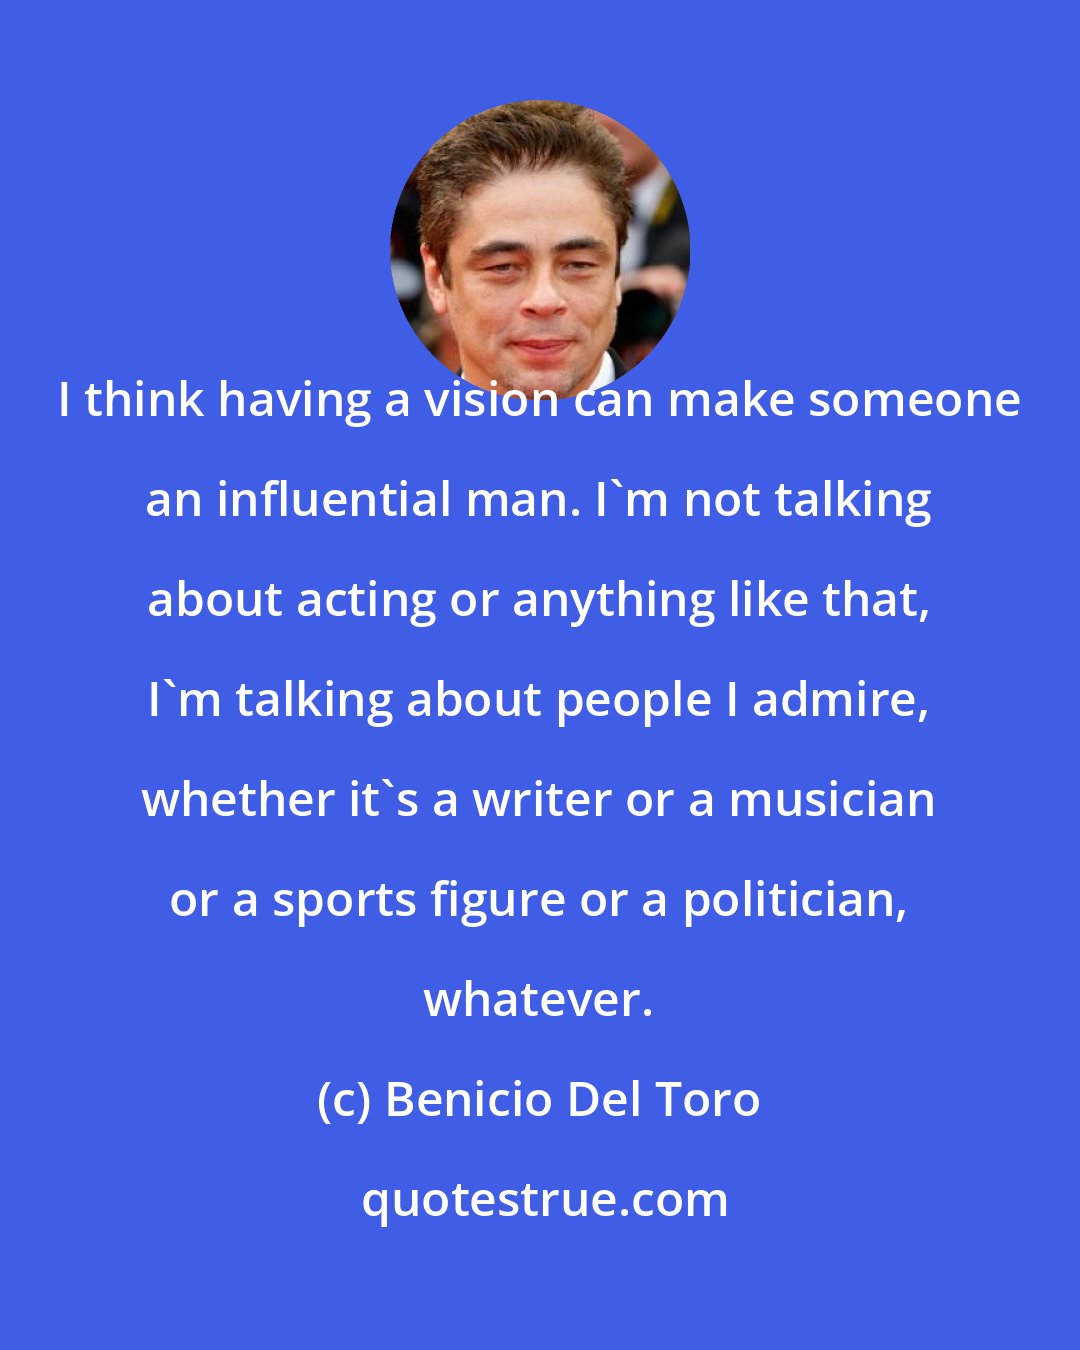 Benicio Del Toro: I think having a vision can make someone an influential man. I'm not talking about acting or anything like that, I'm talking about people I admire, whether it's a writer or a musician or a sports figure or a politician, whatever.